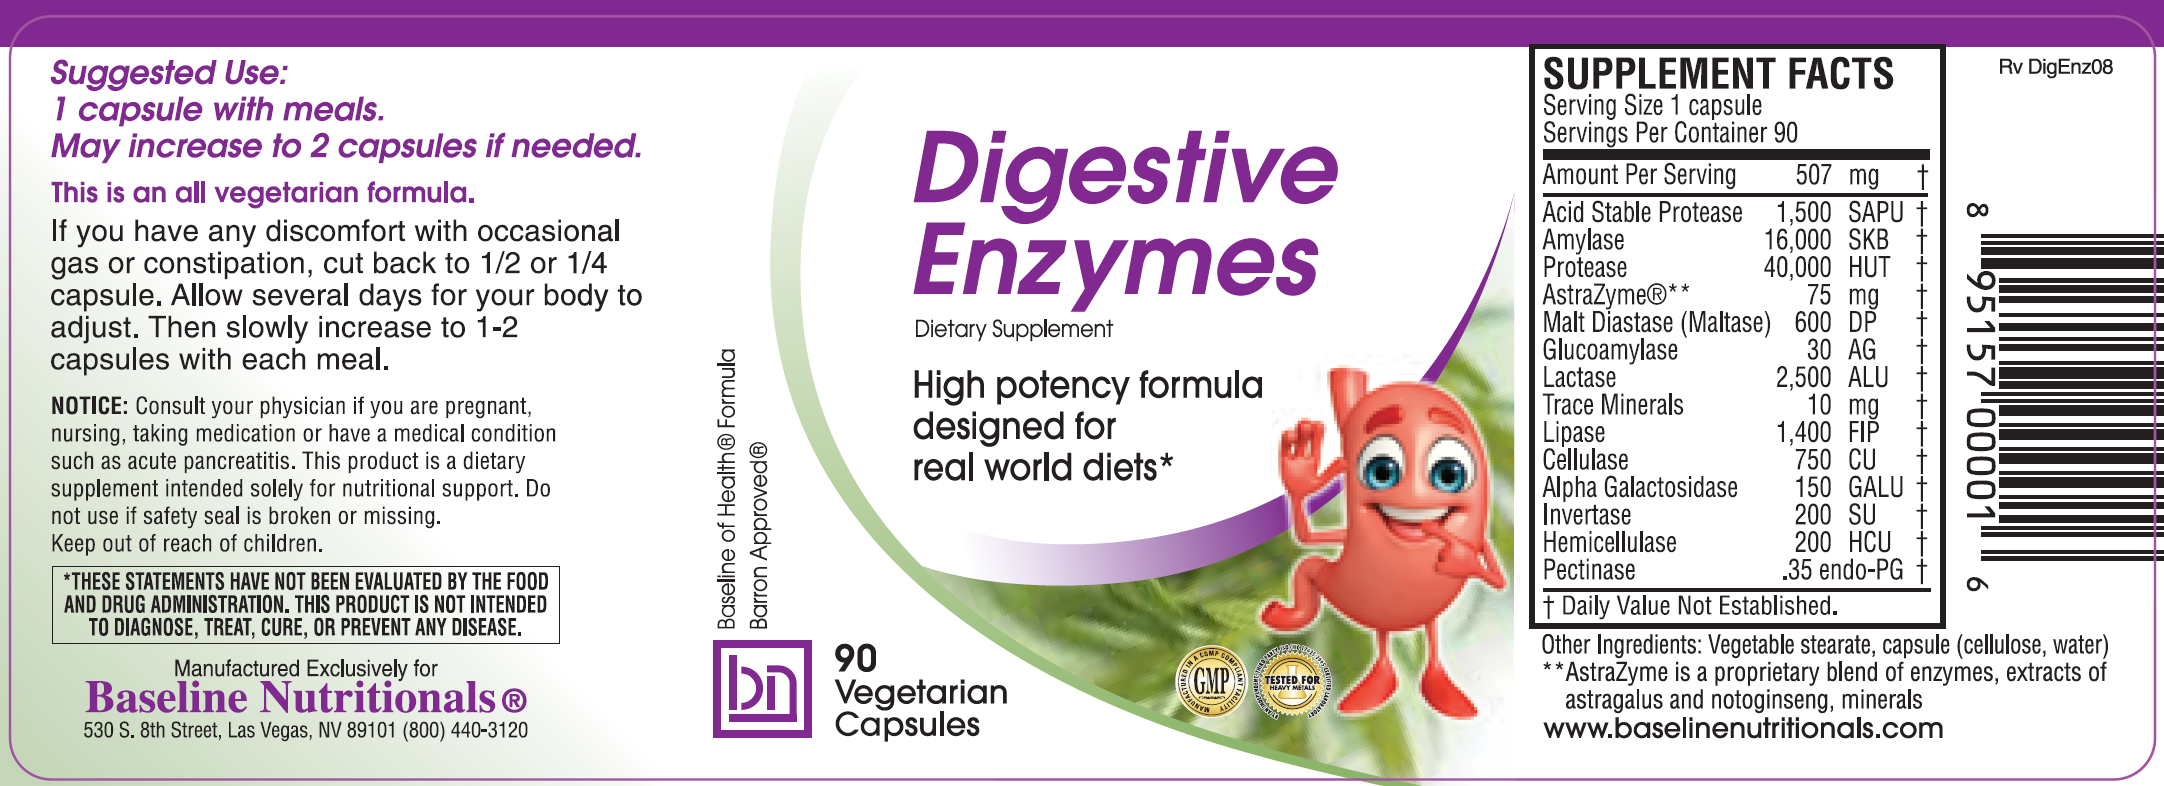 olly digestive enzymes